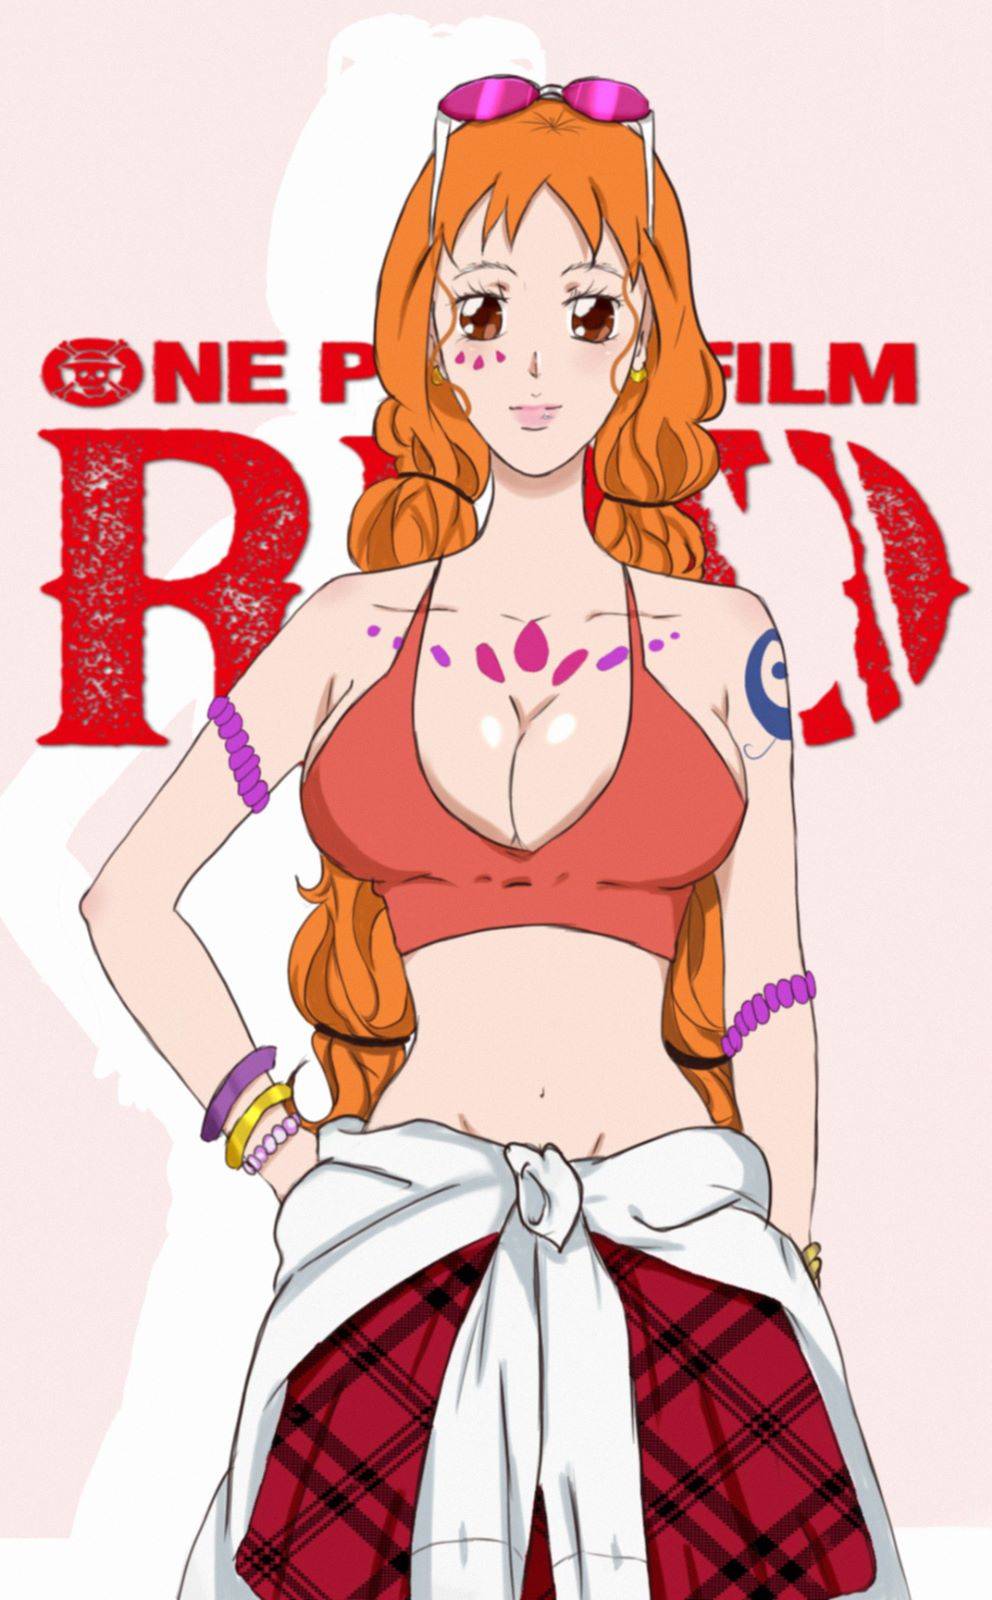 One Piece Film: Red Character Visual (Nami) : r/anime